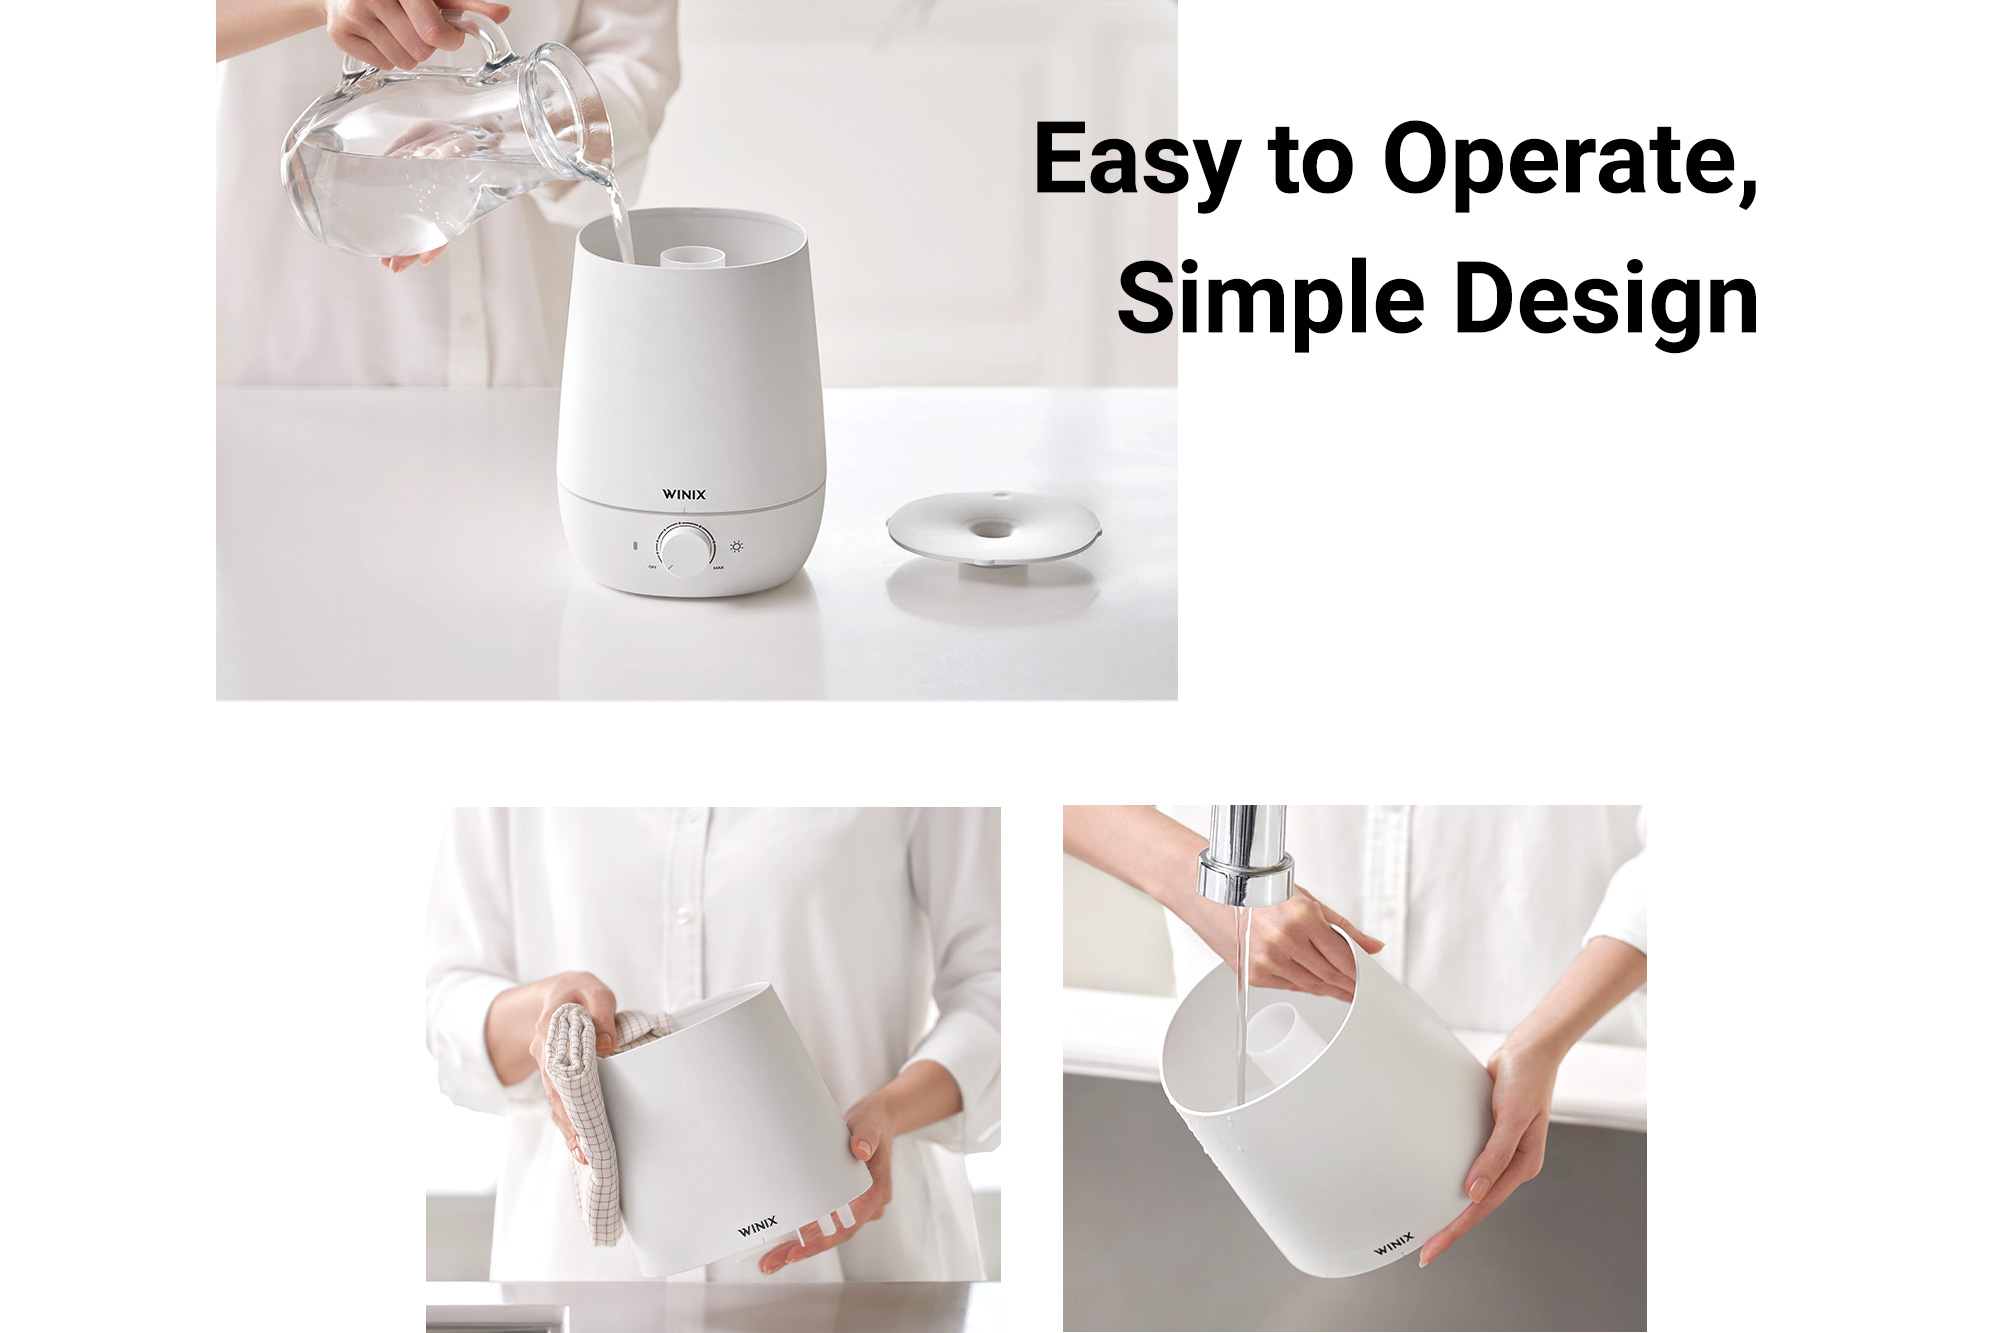 Three images of L60 Humidifier being filled with water, wiped down with a cloth, and being cleaned under faucet and text saying Easy to Operate, Simple Design